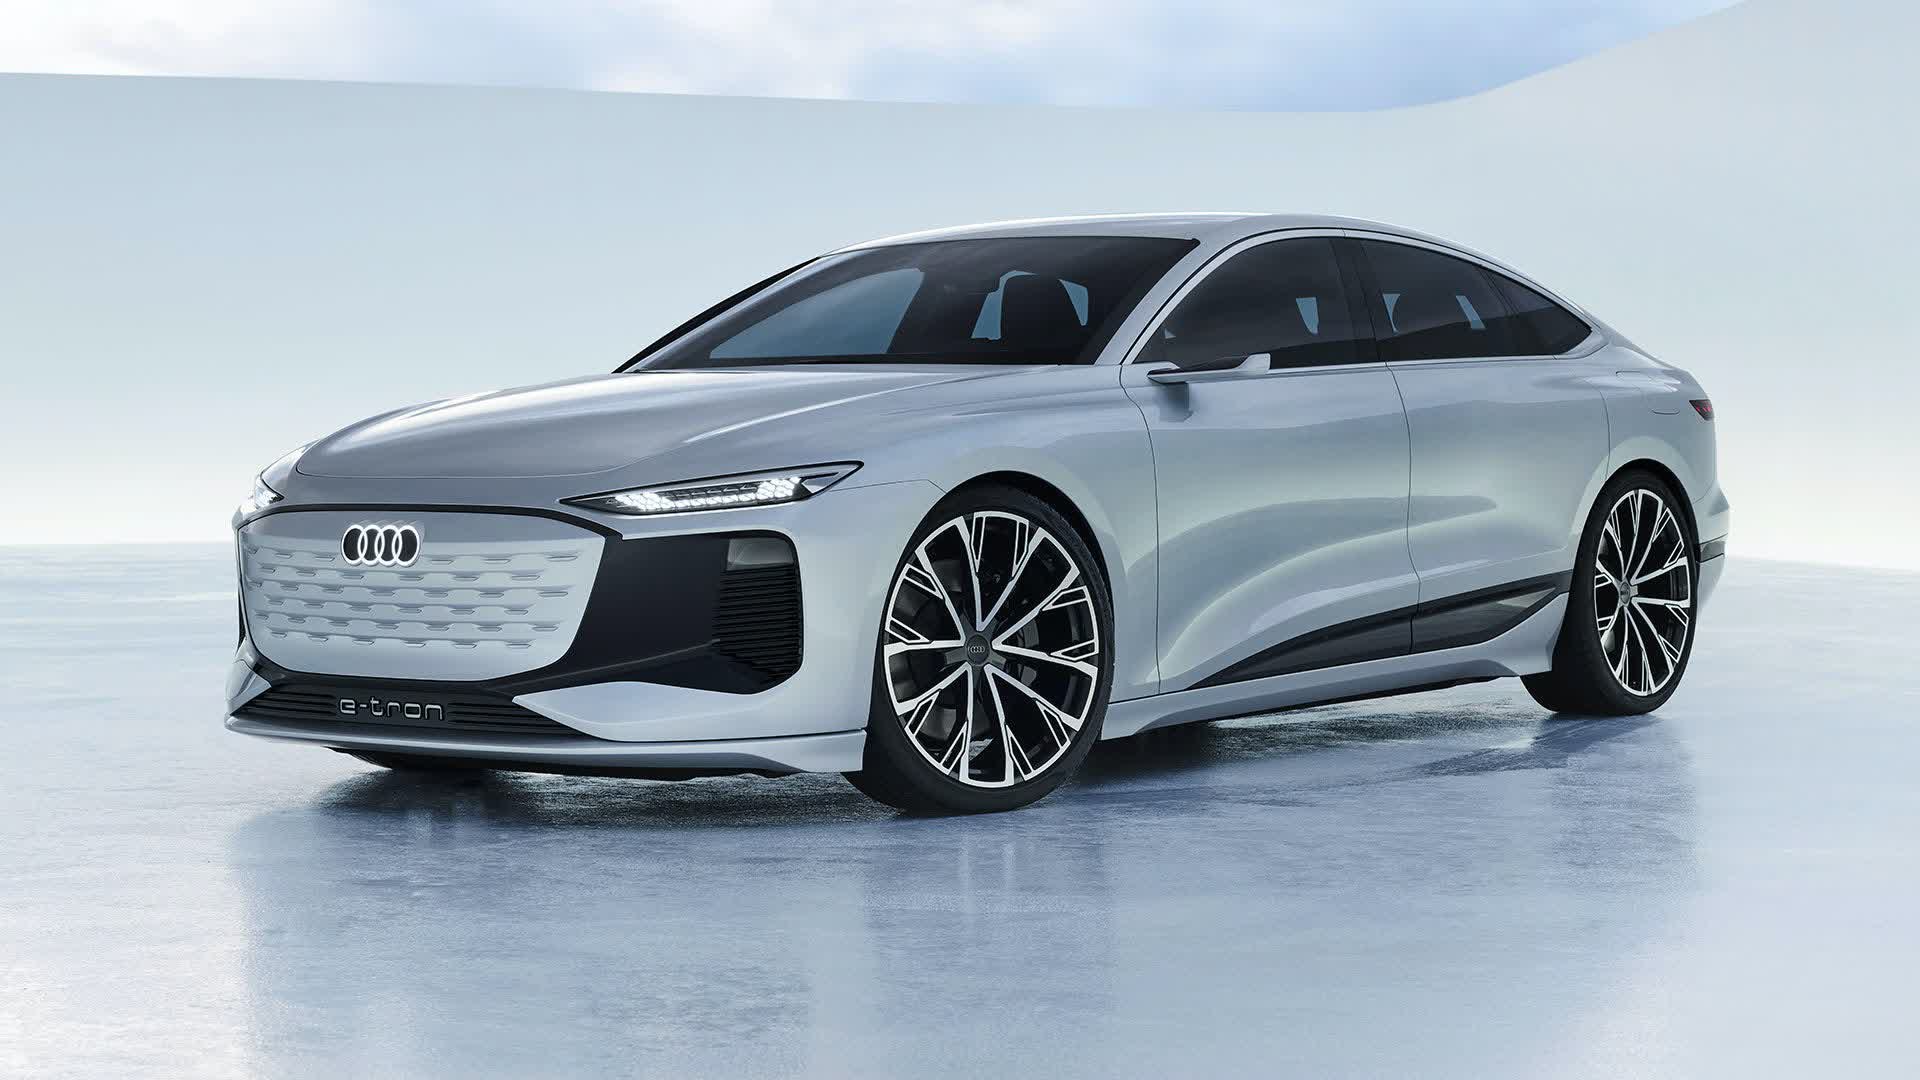 The Audi A6 e-tron concept can project video games with its headlights